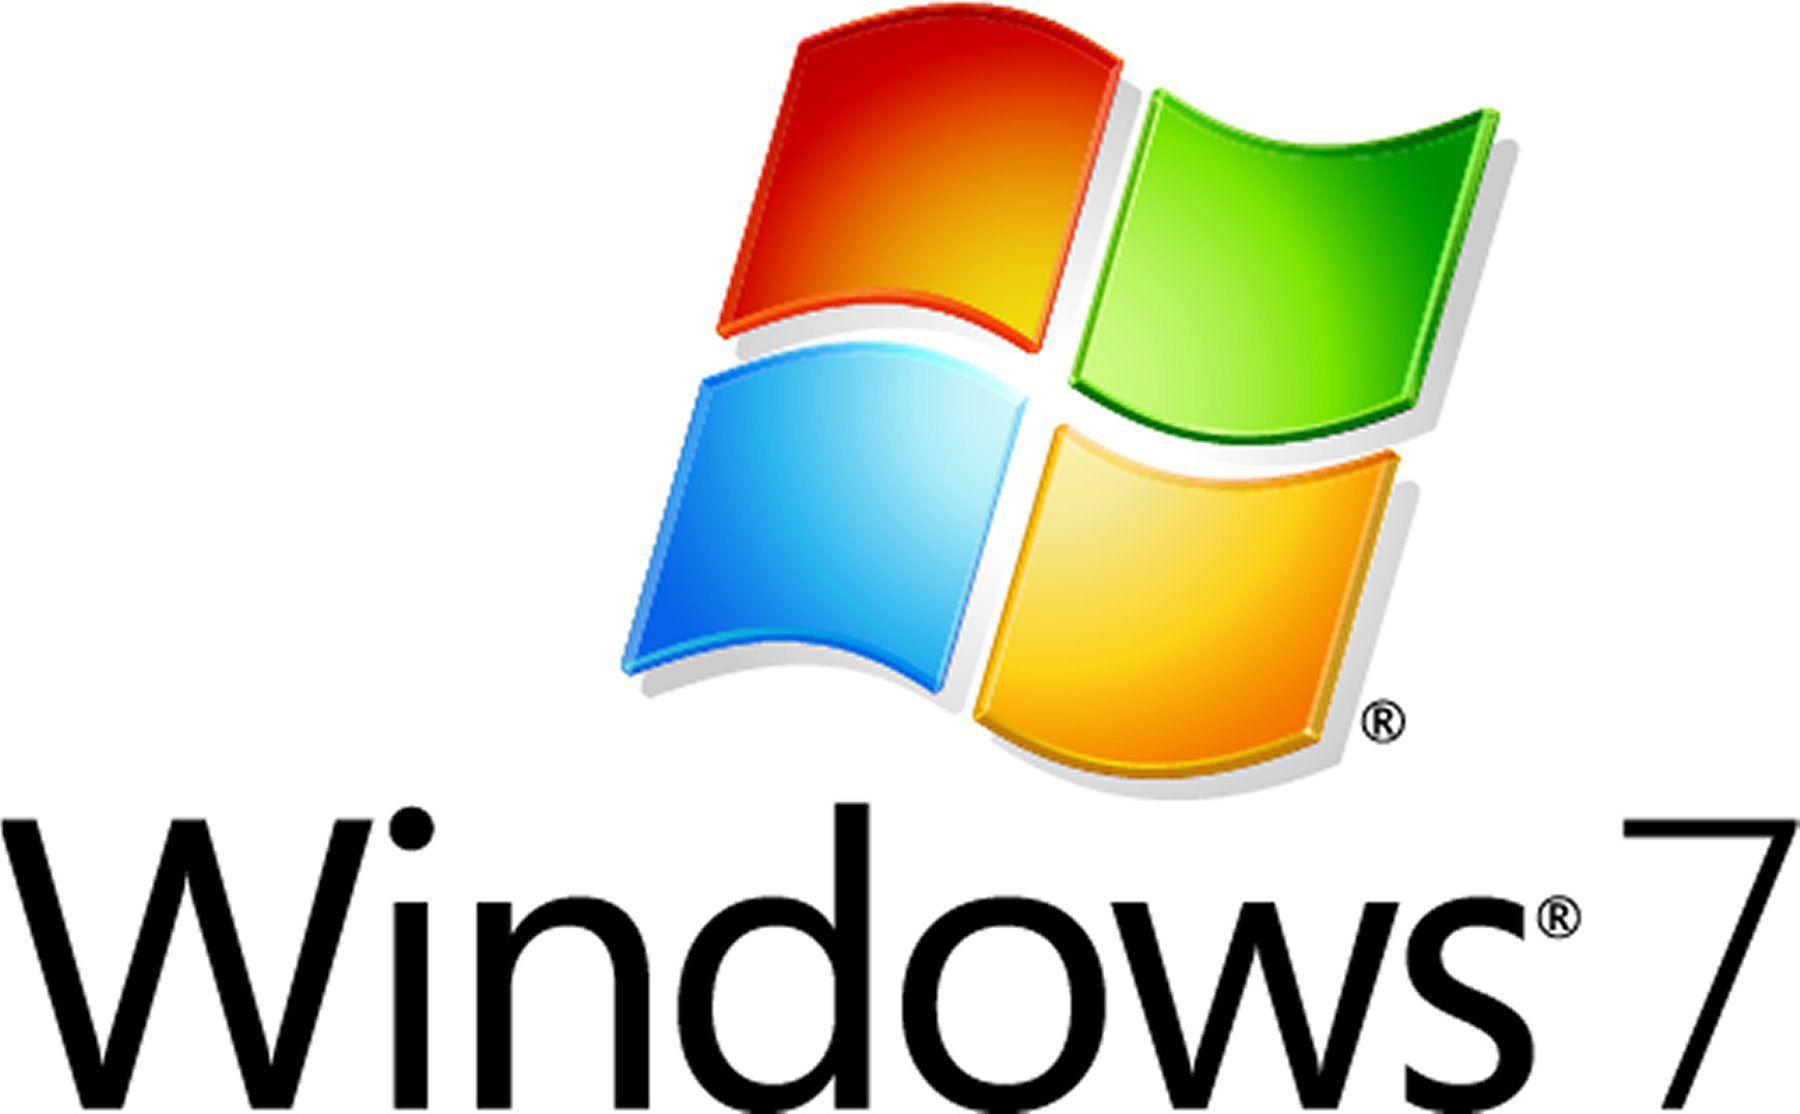 Windows PC Logo - How to fax from any OS